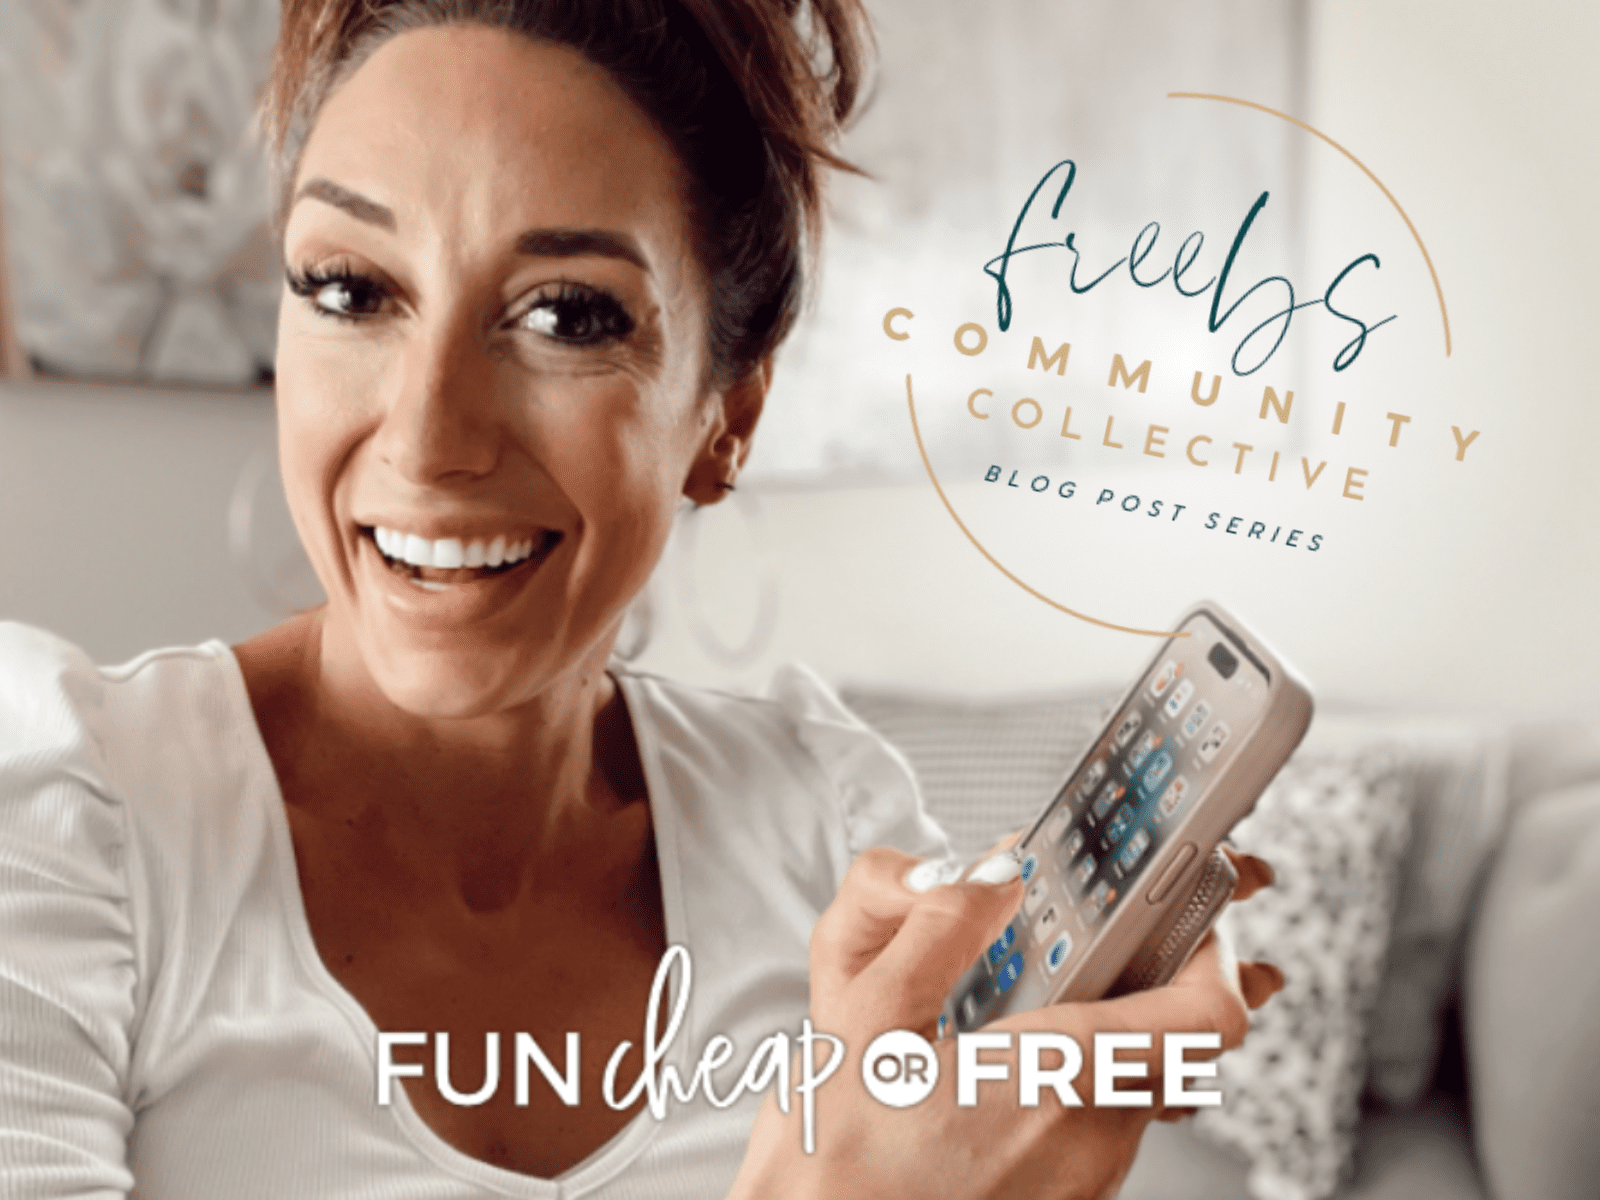 Freebs Community Collective: The BEST Apps To Have On Your Phone (Seriously…Life-Changing!)